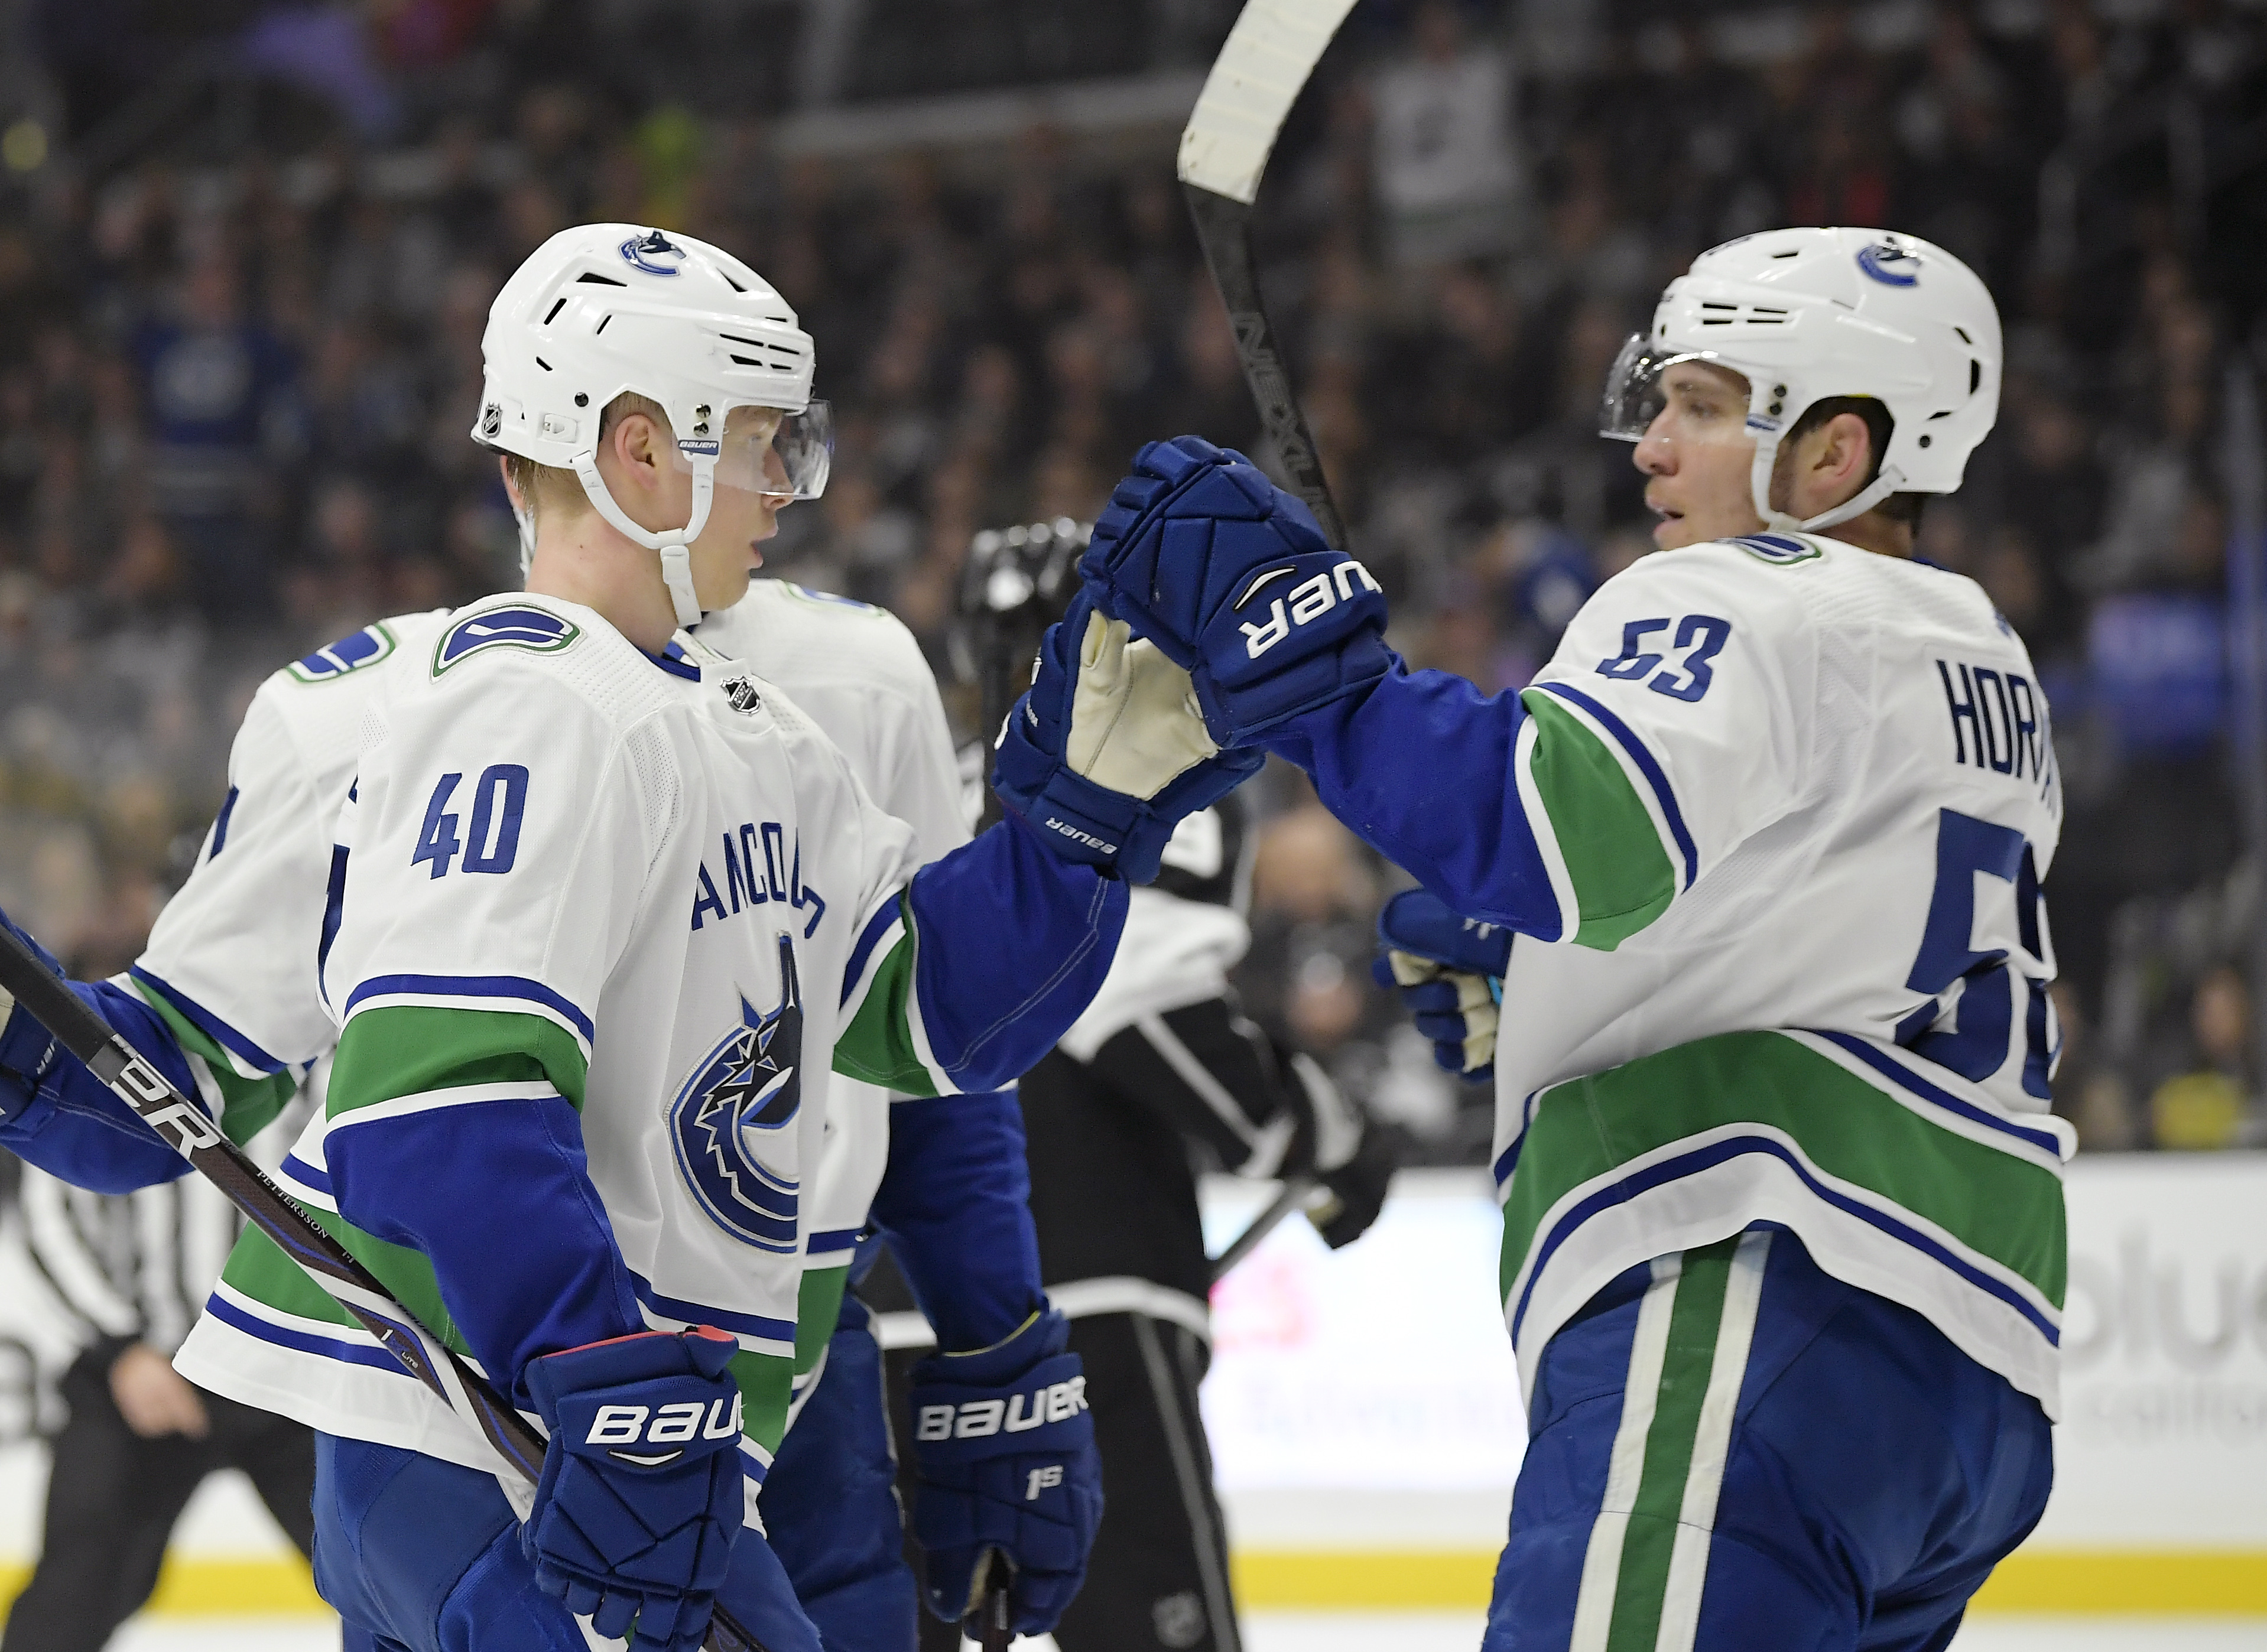 Canucks rally to beat Kings 4-3, end road losing streak at 4